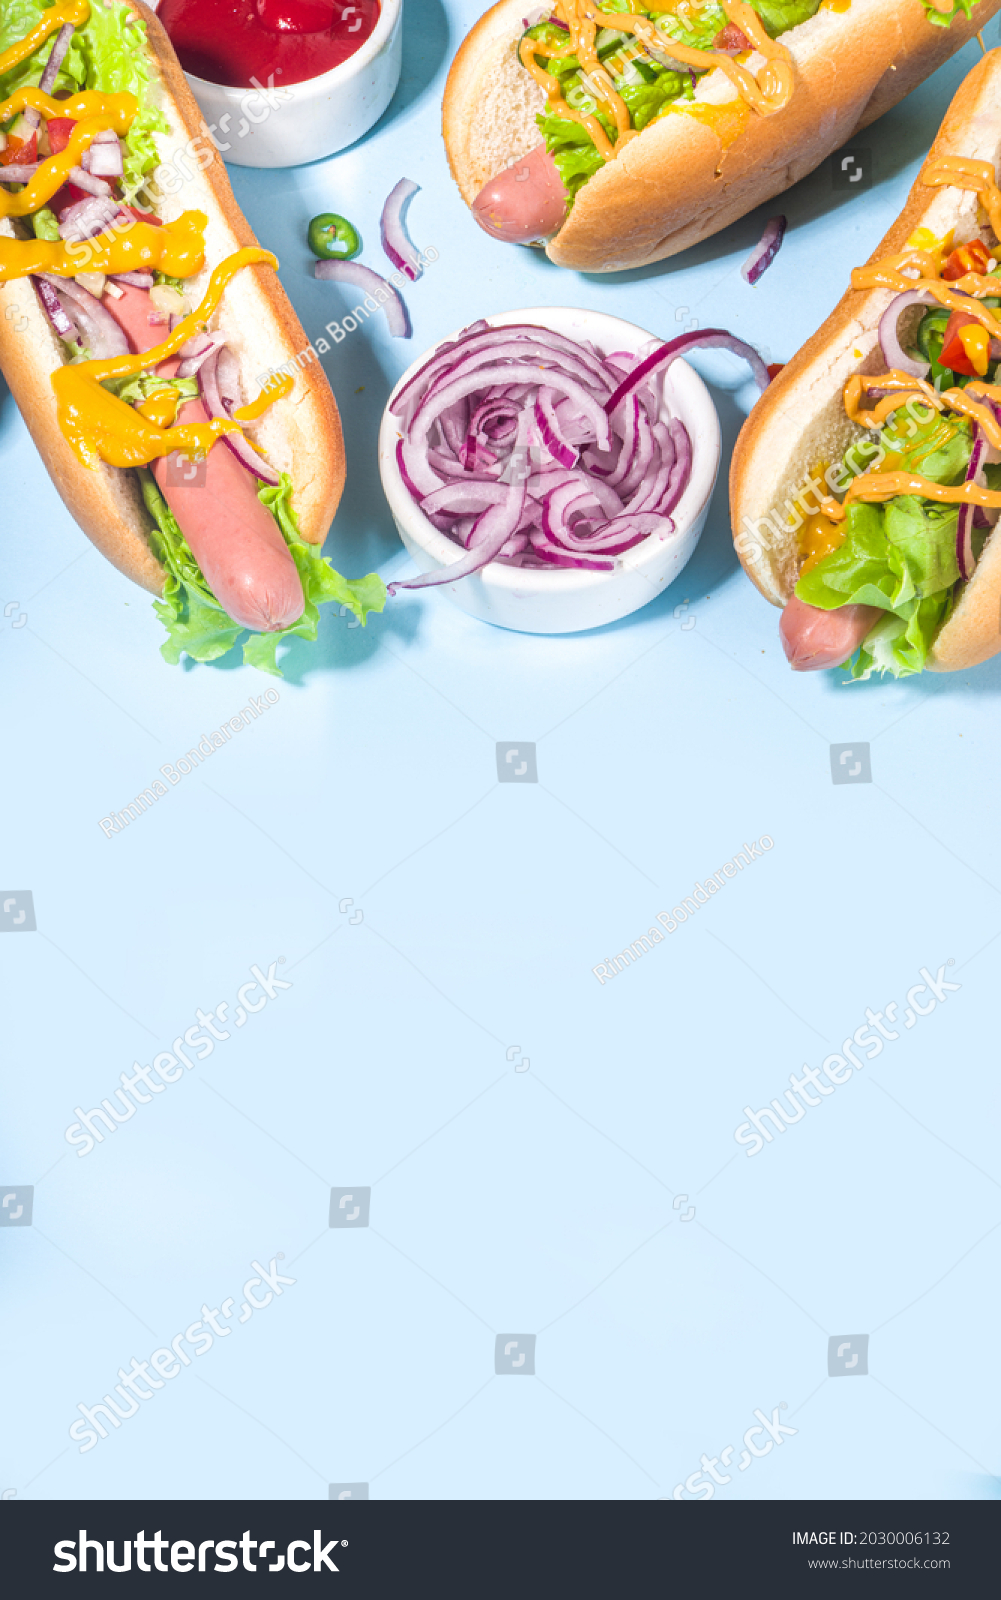 Barbecue grilled fastfood, Various traditional american hot dogs set with sausage, yellow mustard, ketchup and fresh vegetables salad, top view on bright blue background with french fries #2030006132